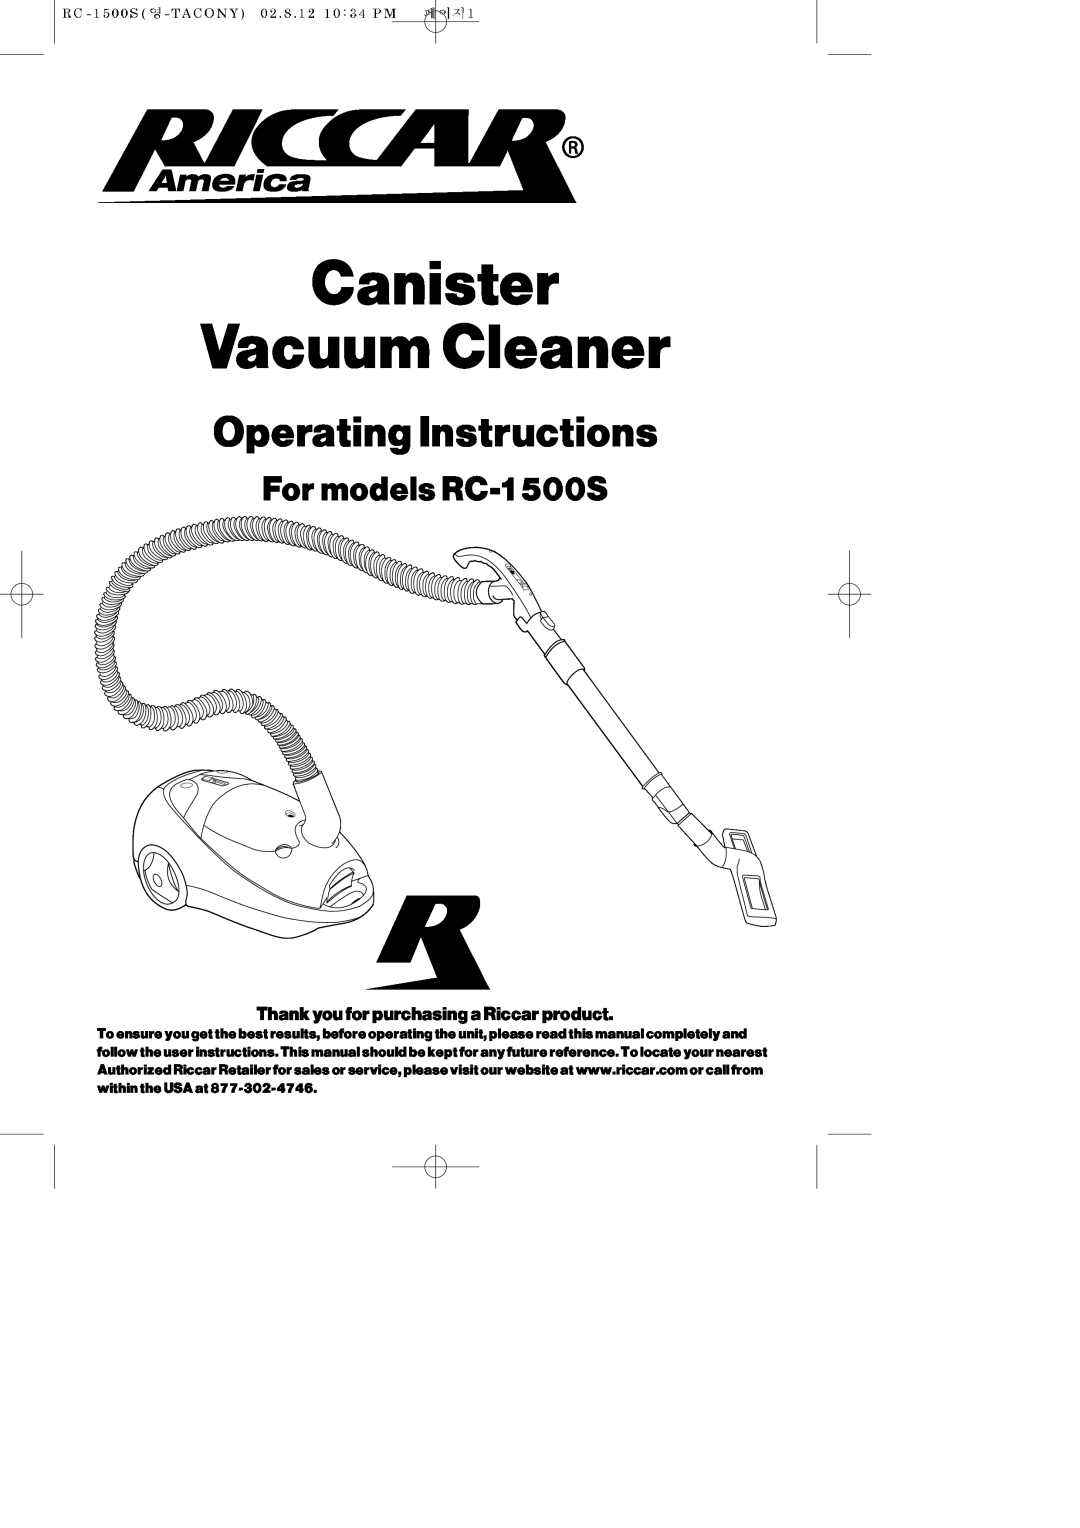 Riccar manual Canister Vacuum Cleaner, Operating Instructions, For models RC-1500S 